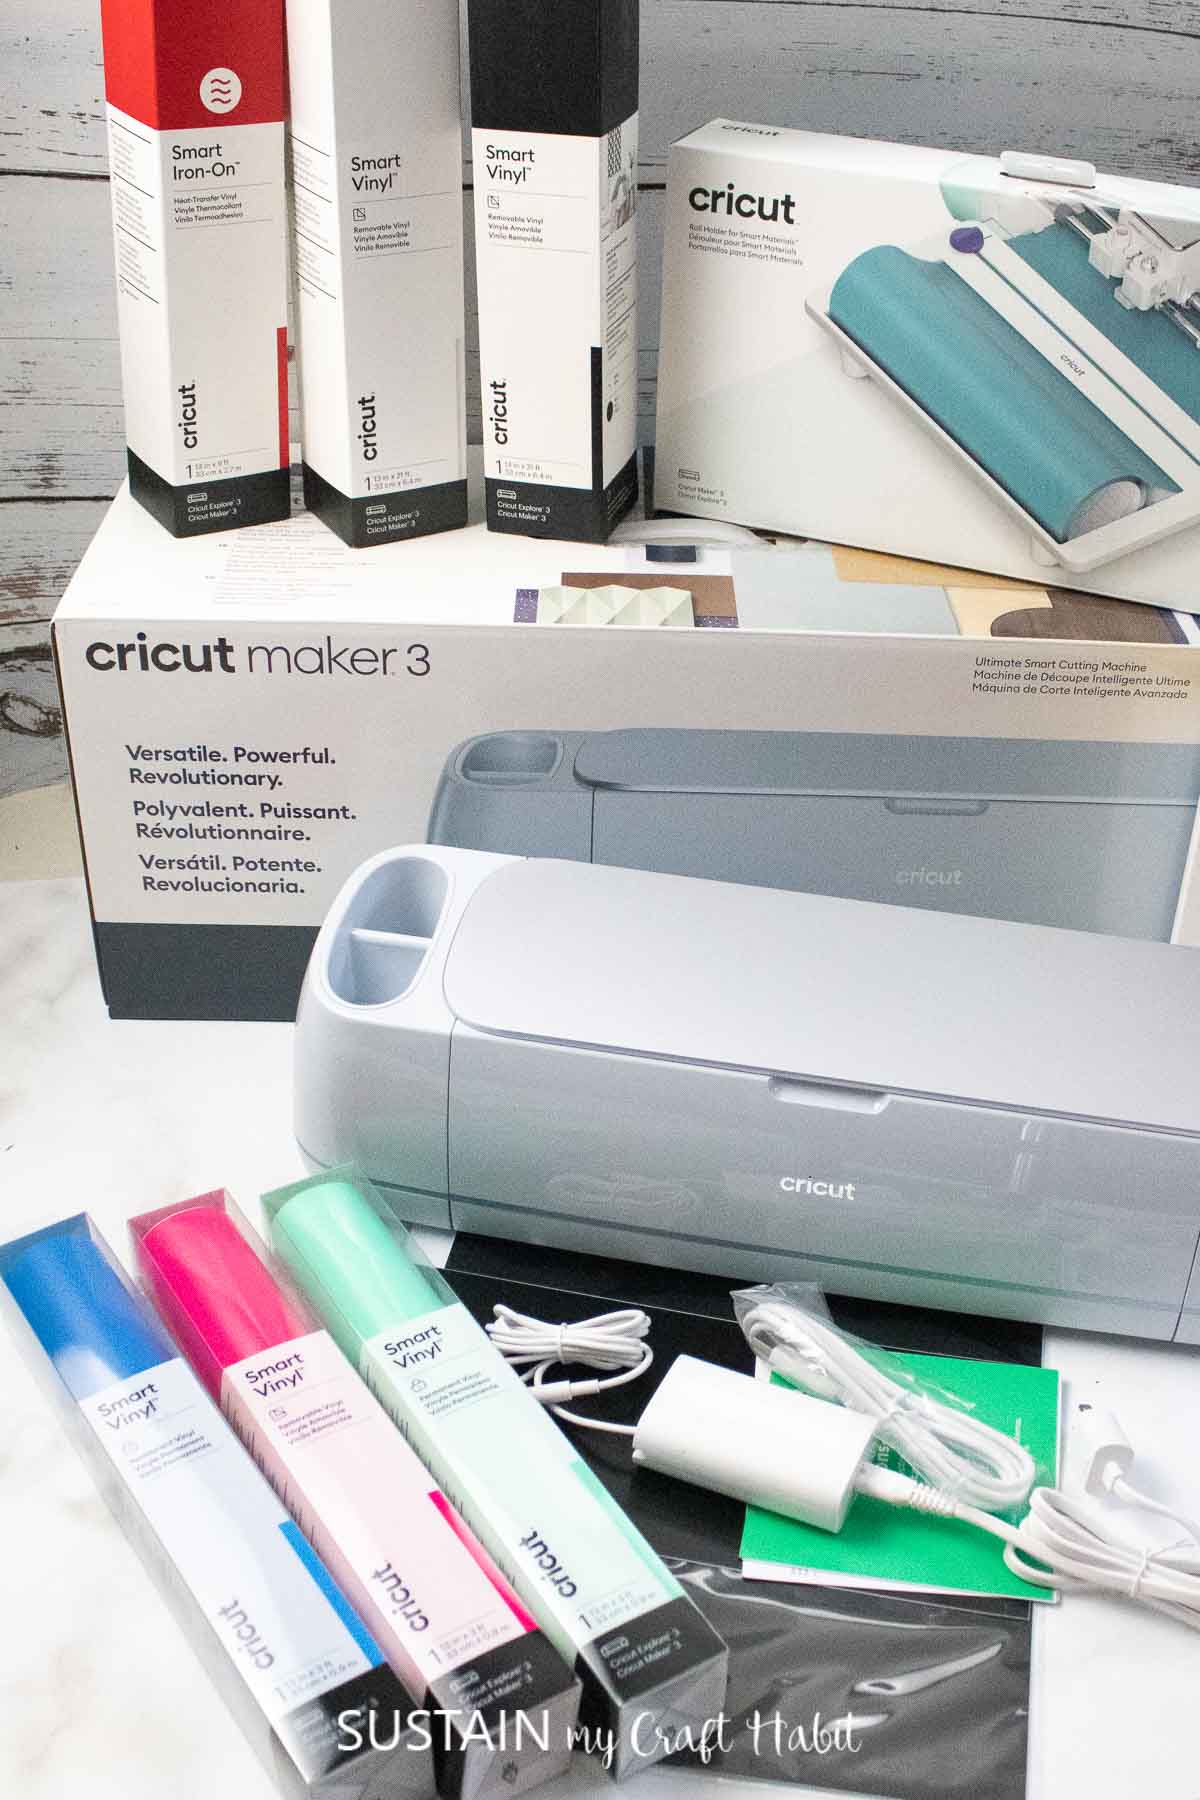 Introducing Cricut Maker 3  Full Machine Review with Unboxing - The Homes  I Have Made